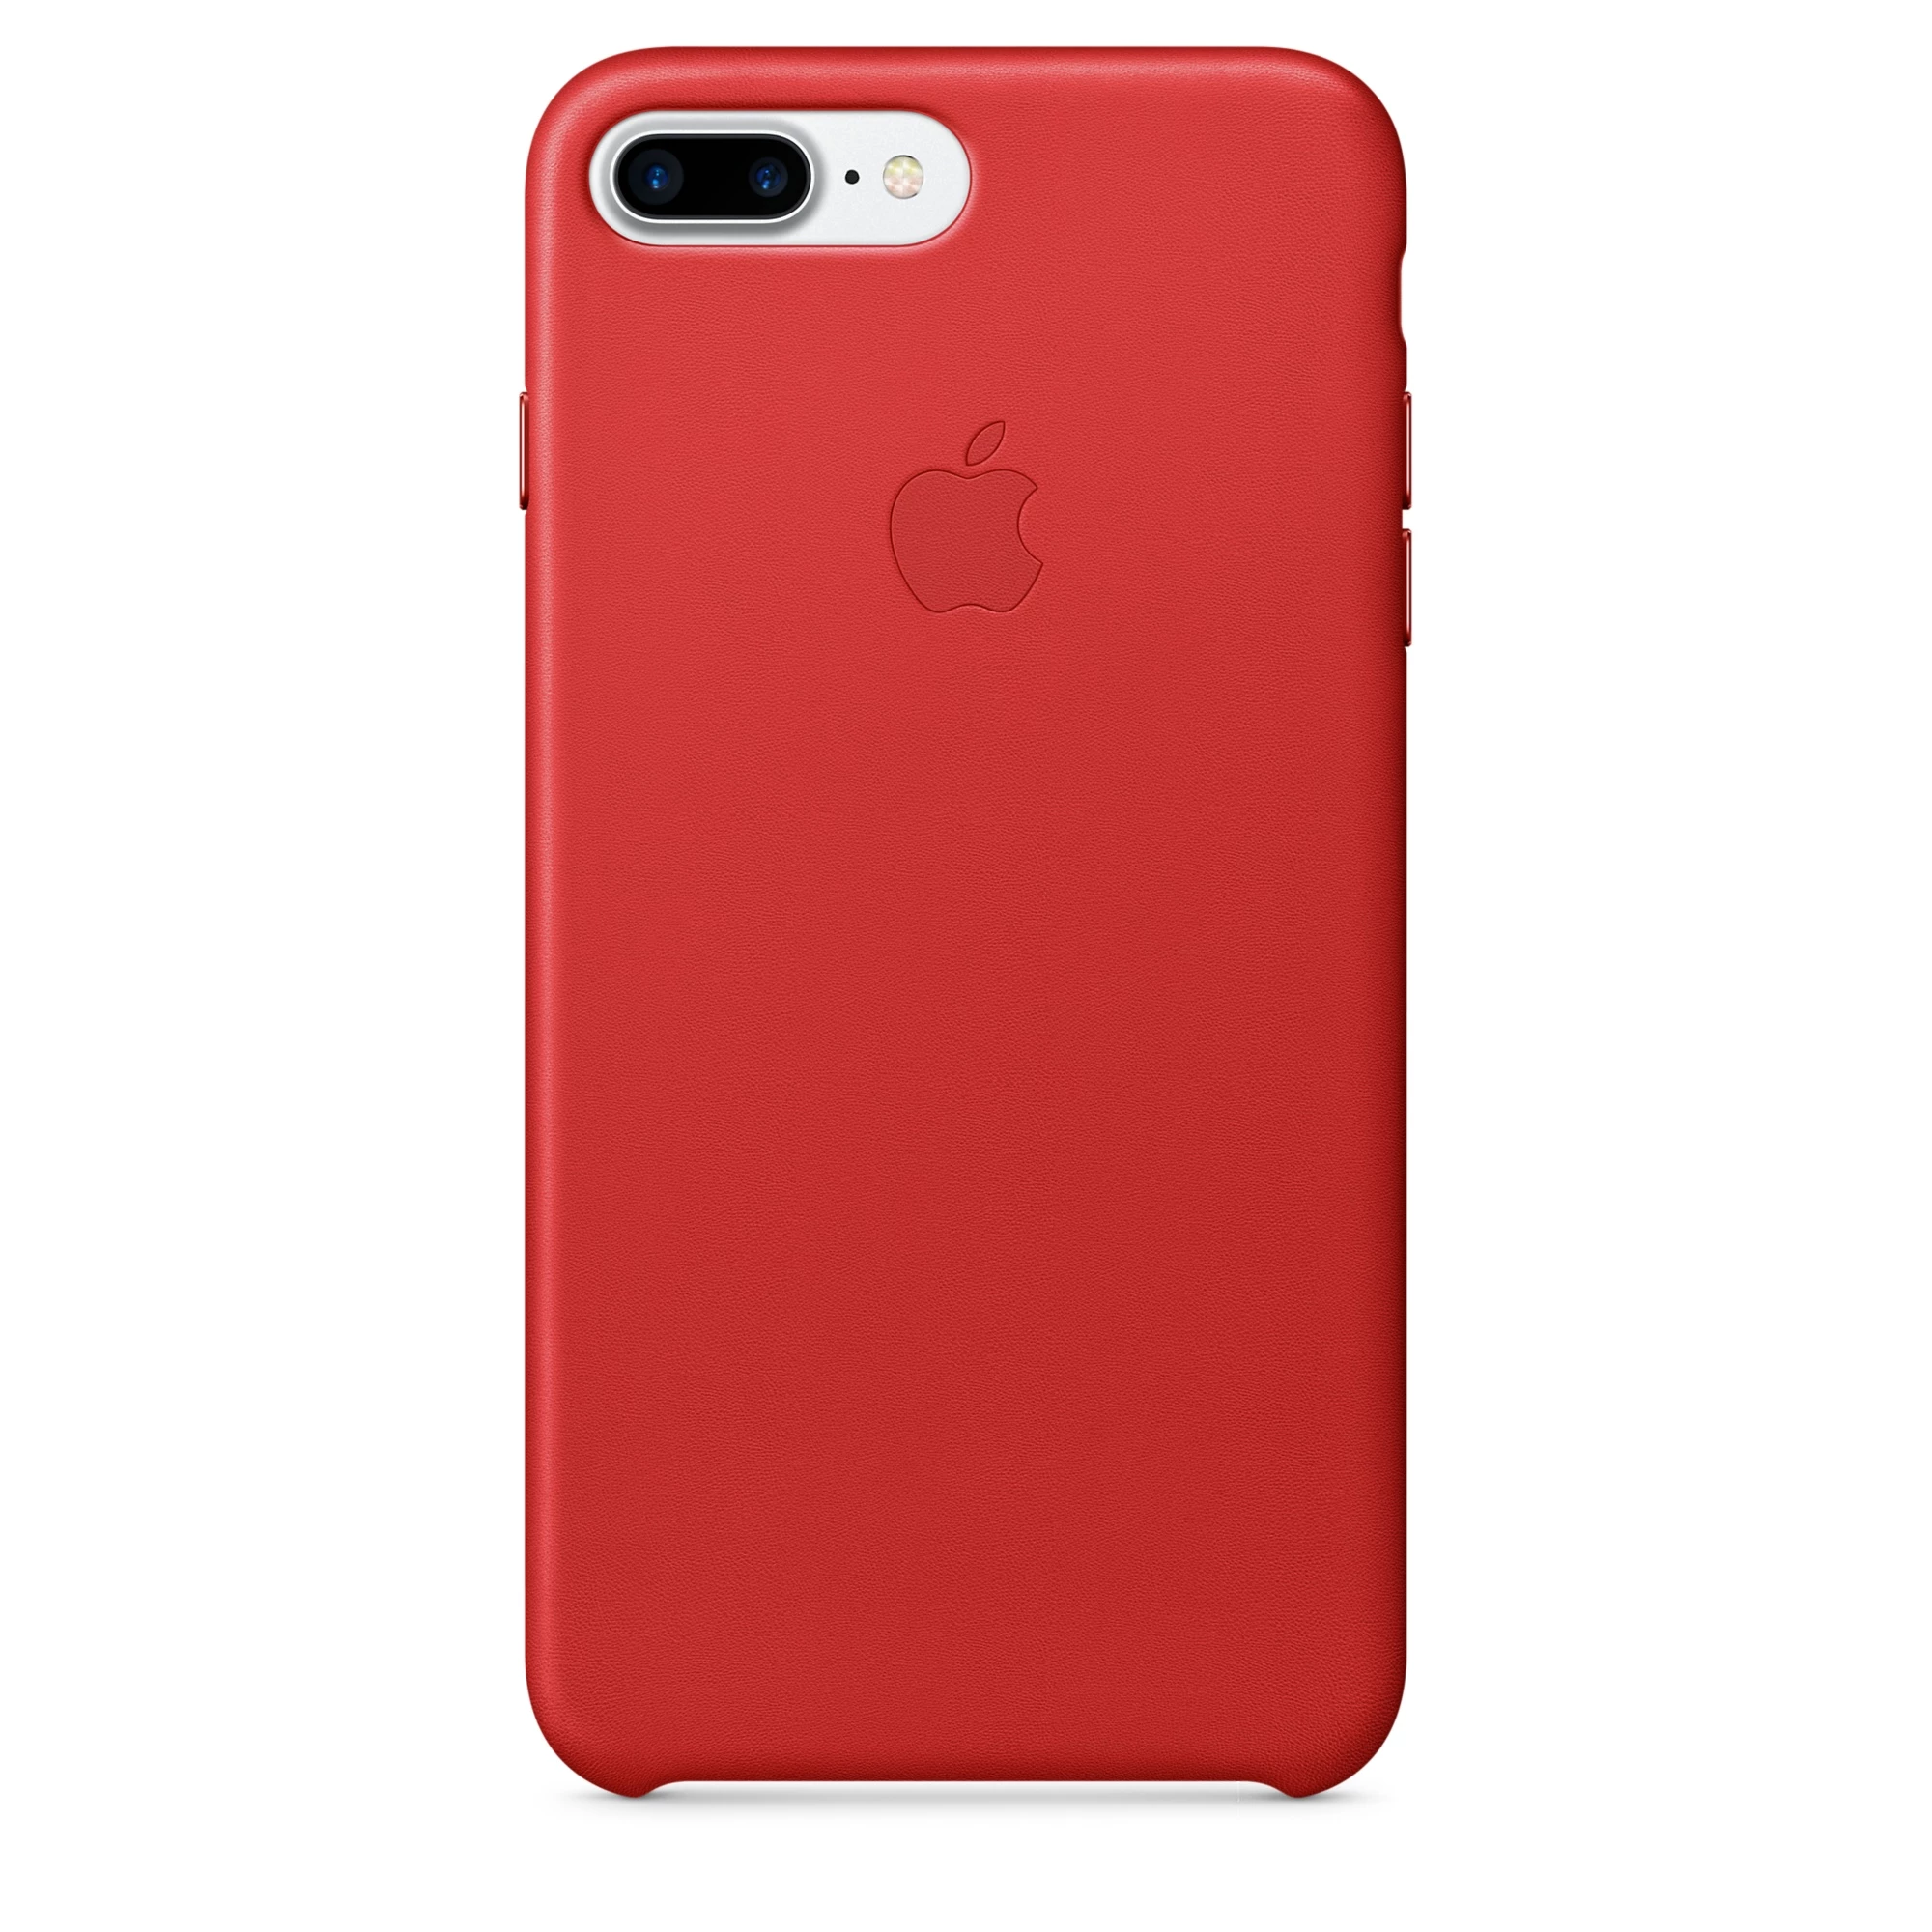 Apple iPhone 7/8 Plus Leather Case - (PRODUCT)RED (MMYK2, MQHN2)